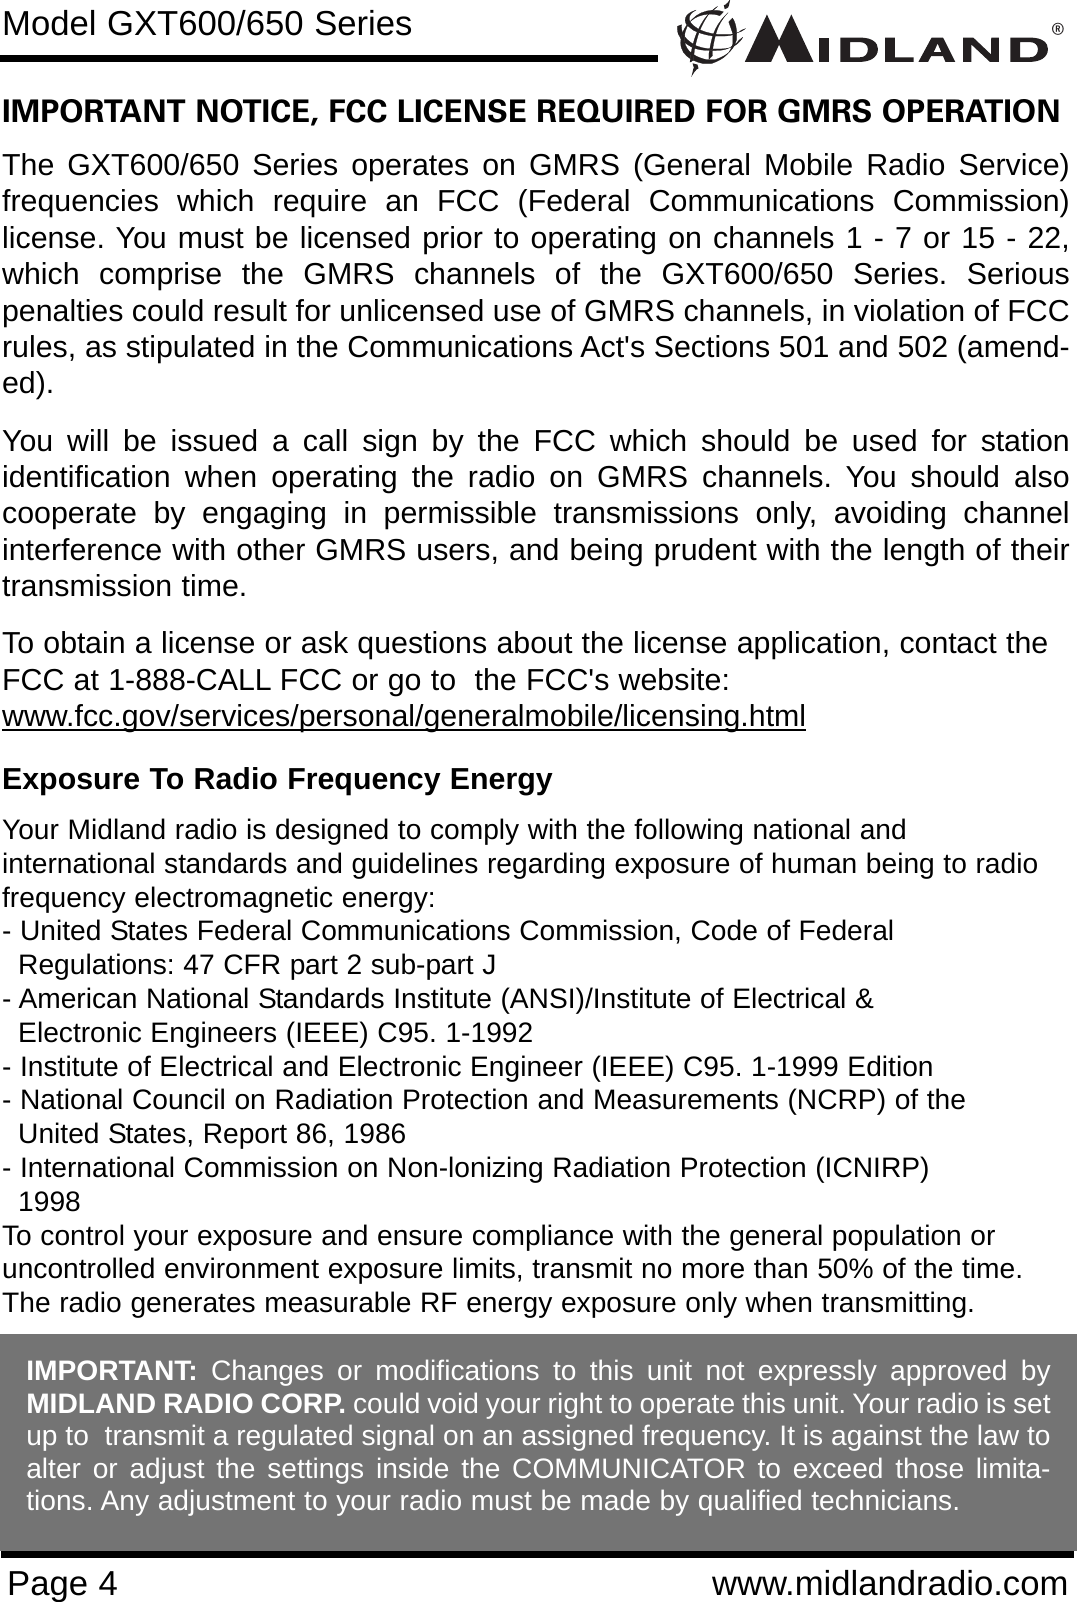 ®Page 4 www.midlandradio.comIMPORTANT NOTICE, FCC LICENSE REQUIRED FOR GMRS OPERATIONThe GXT600/650 Series operates on GMRS (General Mobile Radio Service)frequencies which require an FCC (Federal Communications Commission)license. You must be licensed prior to operating on channels 1 - 7 or 15 - 22,which comprise the GMRS channels of the GXT600/650 Series. Seriouspenalties could result for unlicensed use of GMRS channels, in violation of FCCrules, as stipulated in the Communications Act&apos;s Sections 501 and 502 (amend-ed).You will be issued a call sign by the FCC which should be used for stationidentification when operating the radio on GMRS channels. You should alsocooperate by engaging in permissible transmissions only, avoiding channelinterference with other GMRS users, and being prudent with the length of theirtransmission time.To obtain a license or ask questions about the license application, contact theFCC at 1-888-CALL FCC or go to  the FCC&apos;s website:www.fcc.gov/services/personal/generalmobile/licensing.htmlExposure To Radio Frequency EnergyYour Midland radio is designed to comply with the following national and international standards and guidelines regarding exposure of human being to radiofrequency electromagnetic energy:- United States Federal Communications Commission, Code of Federal Regulations: 47 CFR part 2 sub-part J- American National Standards Institute (ANSI)/Institute of Electrical &amp; Electronic Engineers (IEEE) C95. 1-1992- Institute of Electrical and Electronic Engineer (IEEE) C95. 1-1999 Edition- National Council on Radiation Protection and Measurements (NCRP) of the United States, Report 86, 1986- International Commission on Non-lonizing Radiation Protection (ICNIRP) 1998To control your exposure and ensure compliance with the general population oruncontrolled environment exposure limits, transmit no more than 50% of the time.The radio generates measurable RF energy exposure only when transmitting.Model GXT600/650 SeriesIMPORTANT: Changes or modifications to this unit not expressly approved byMIDLAND RADIO CORP. could void your right to operate this unit. Your radio is setup to  transmit a regulated signal on an assigned frequency. It is against the law toalter or adjust the settings inside the COMMUNICATOR to exceed those limita-tions. Any adjustment to your radio must be made by qualified technicians.